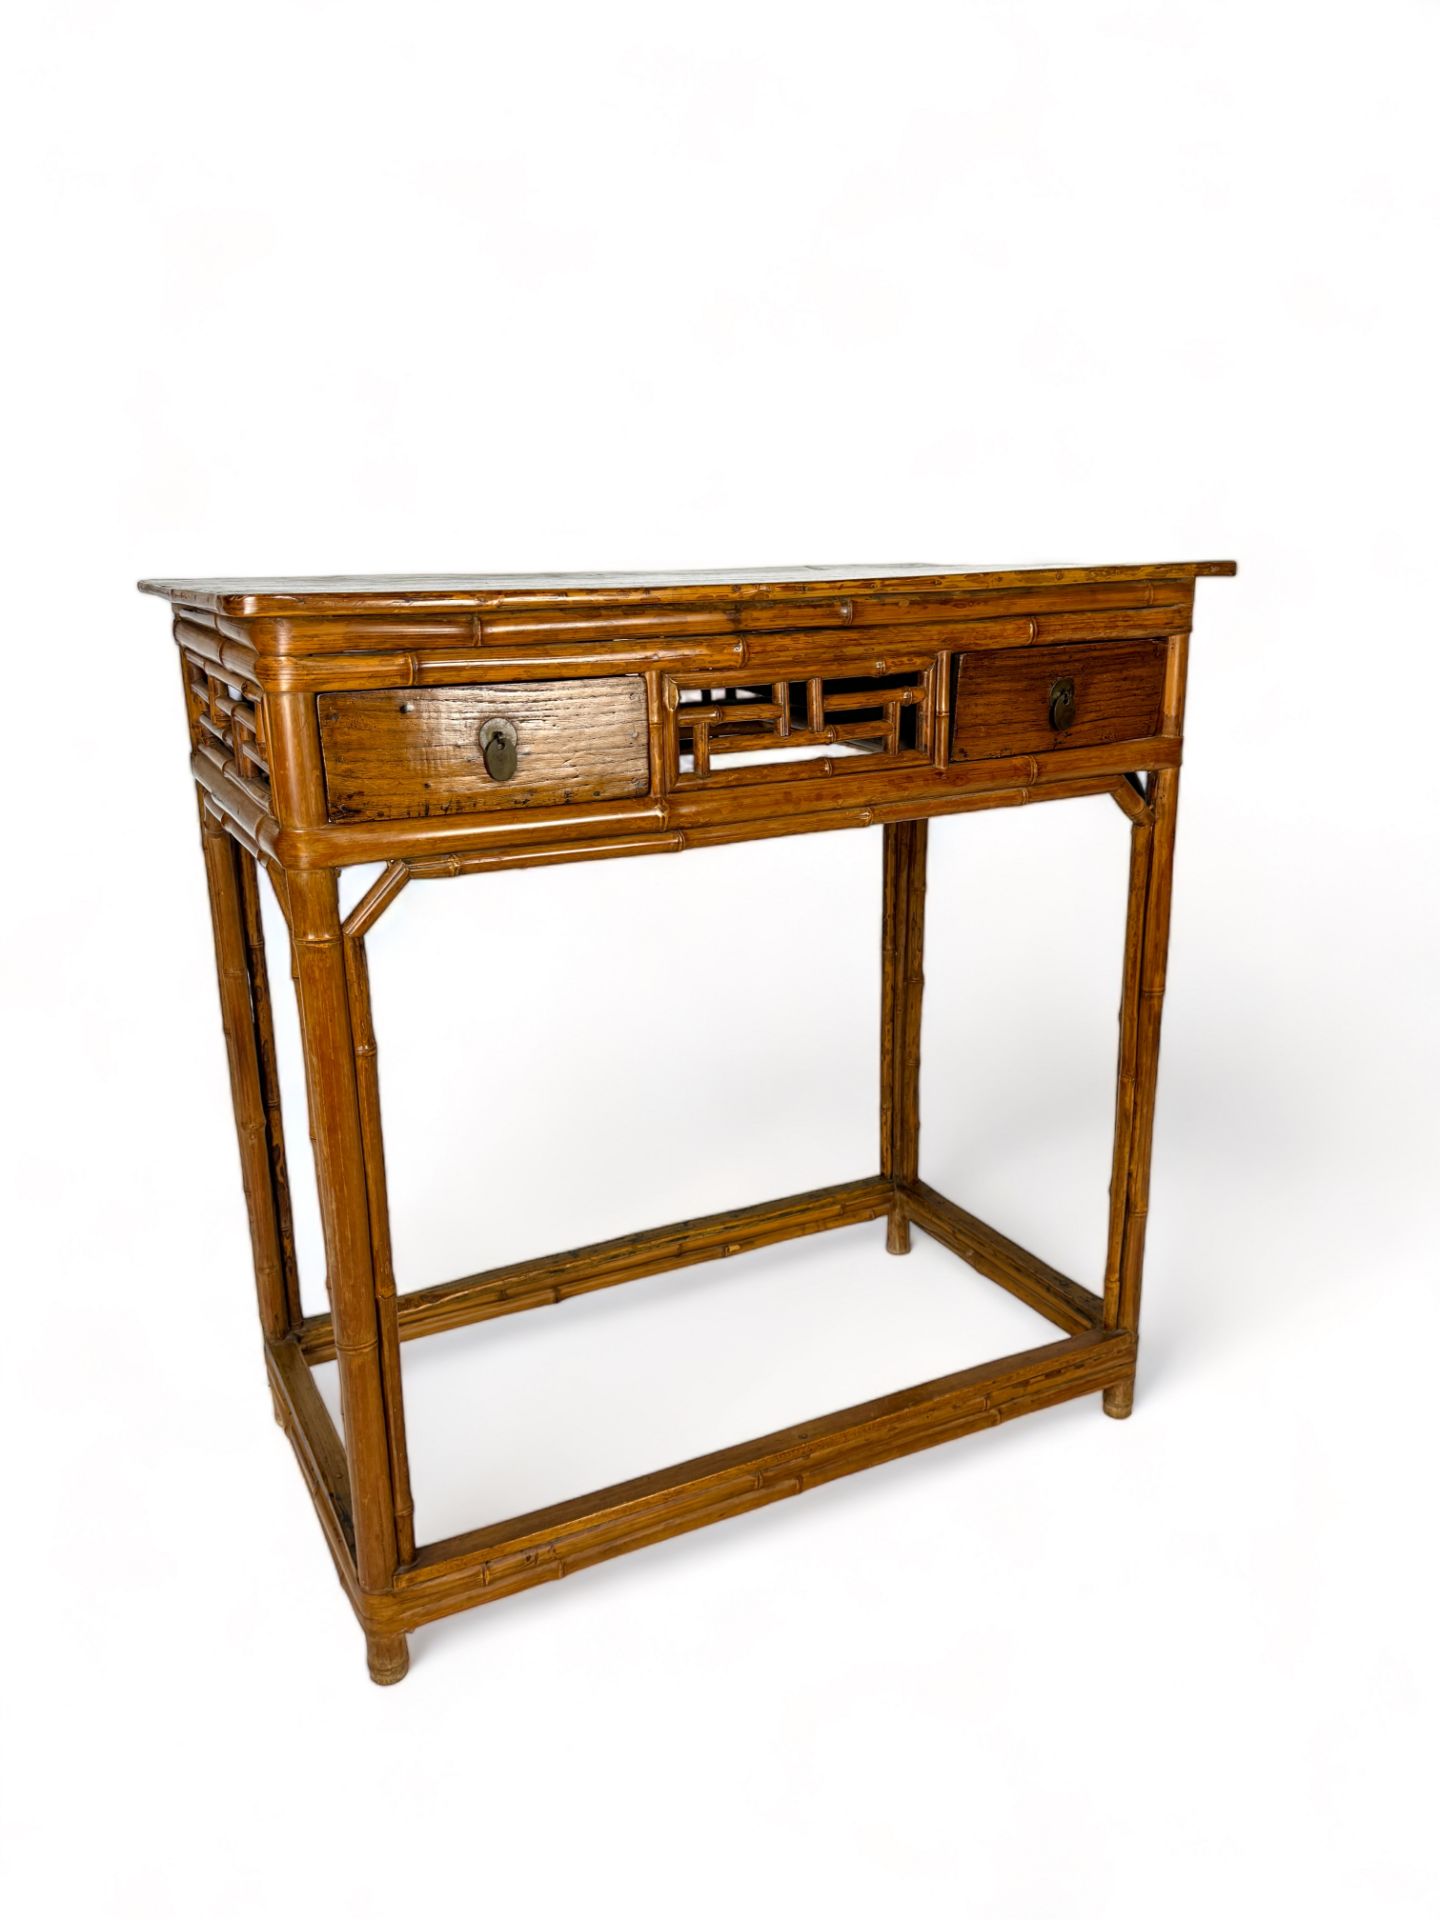 A 19th century Chinese elm and bamboo table - Image 5 of 6